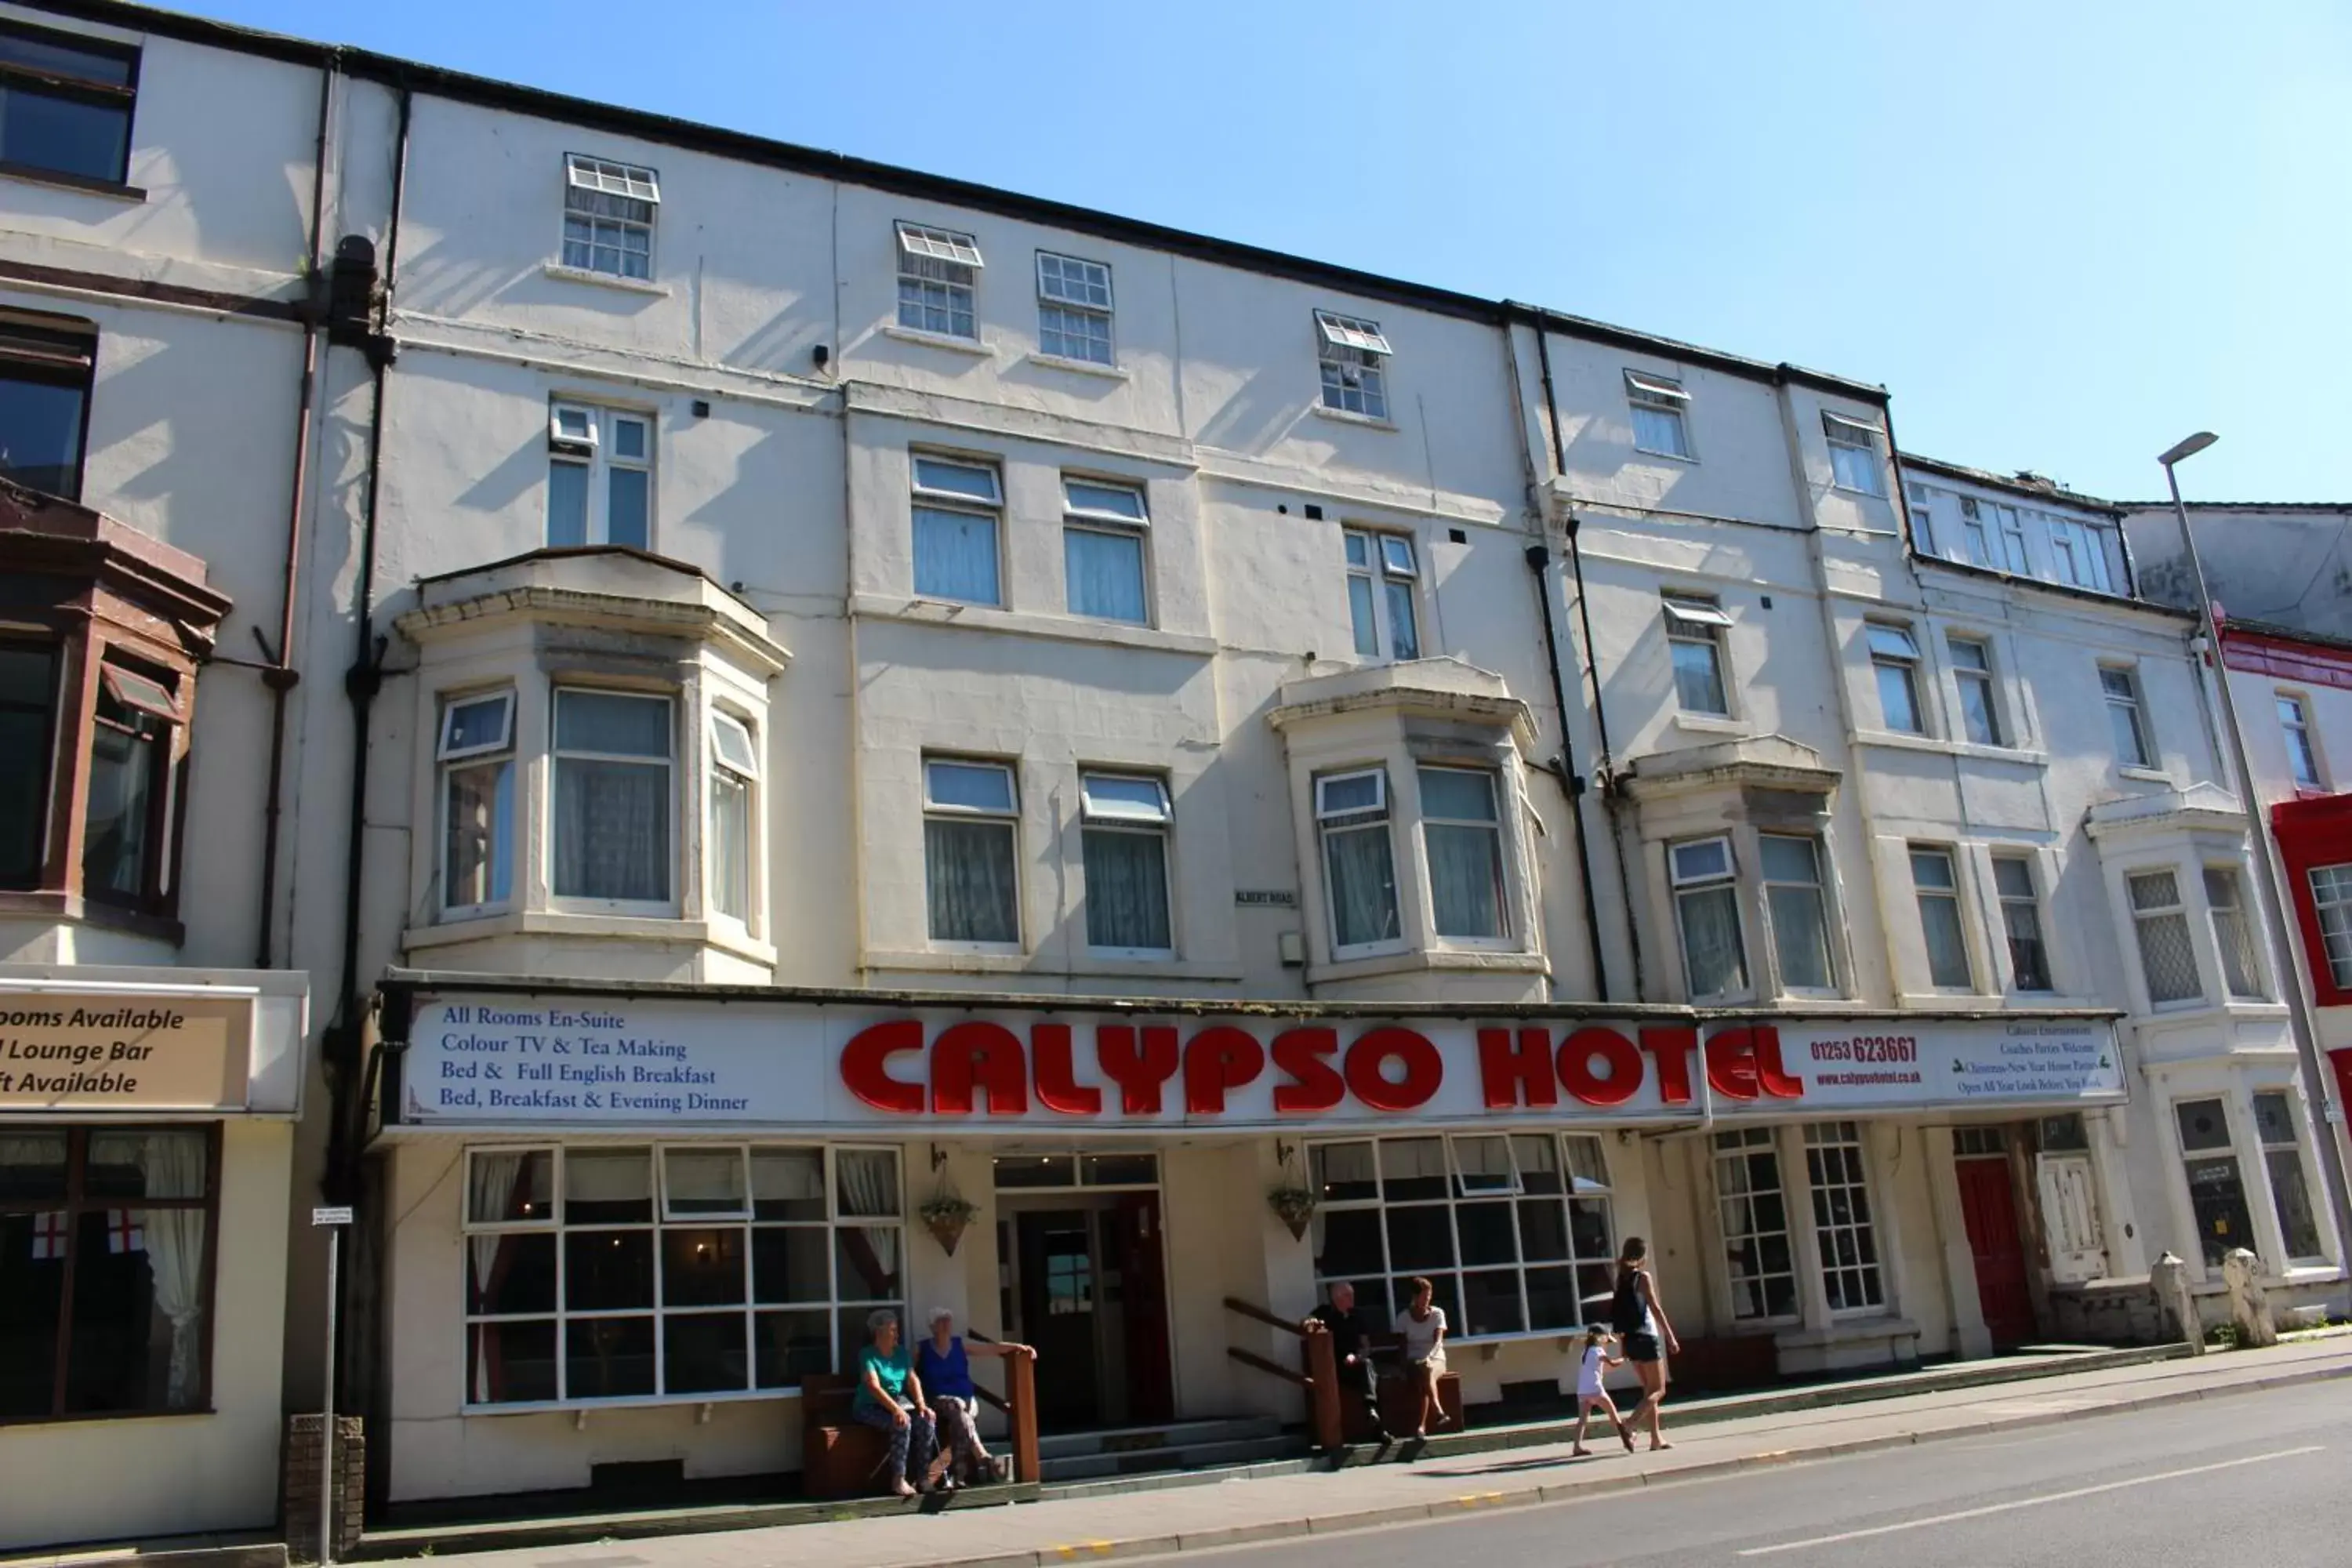 Property logo or sign, Property Building in Calypso hotel Blackpool